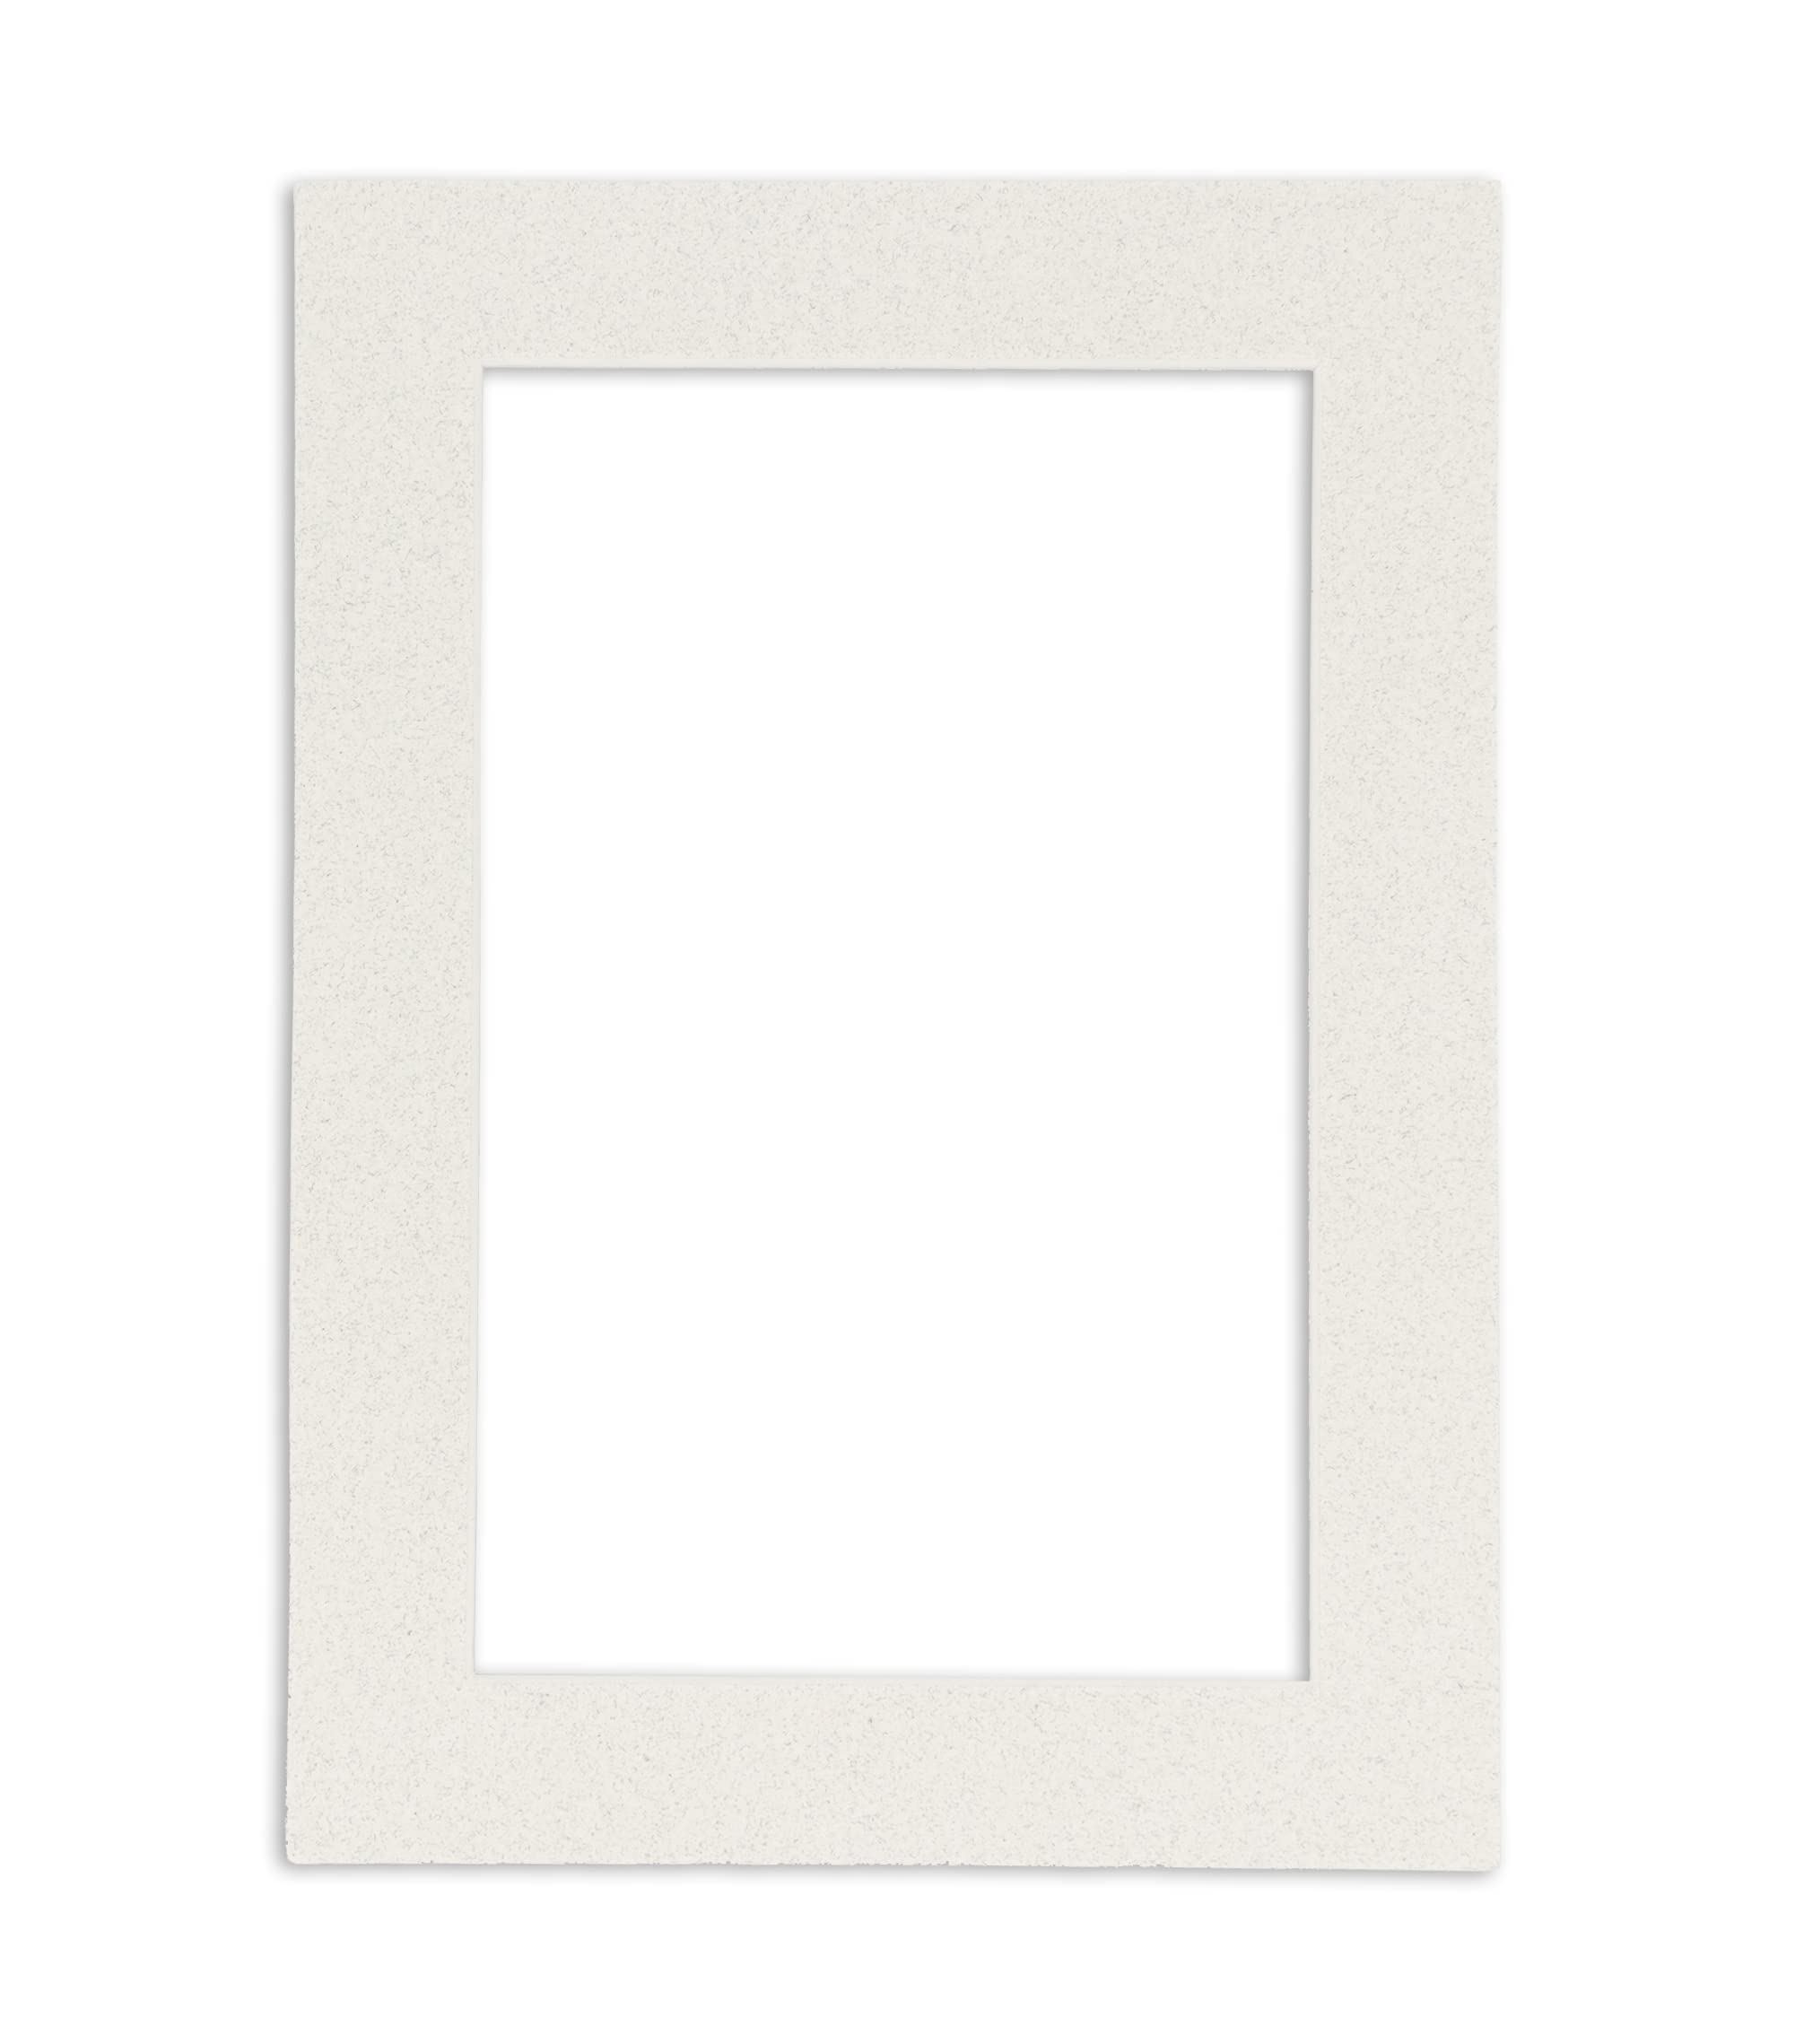 Picture Framing Mat 16x20 mat for 11x14 diploma or foto set of 6 same size